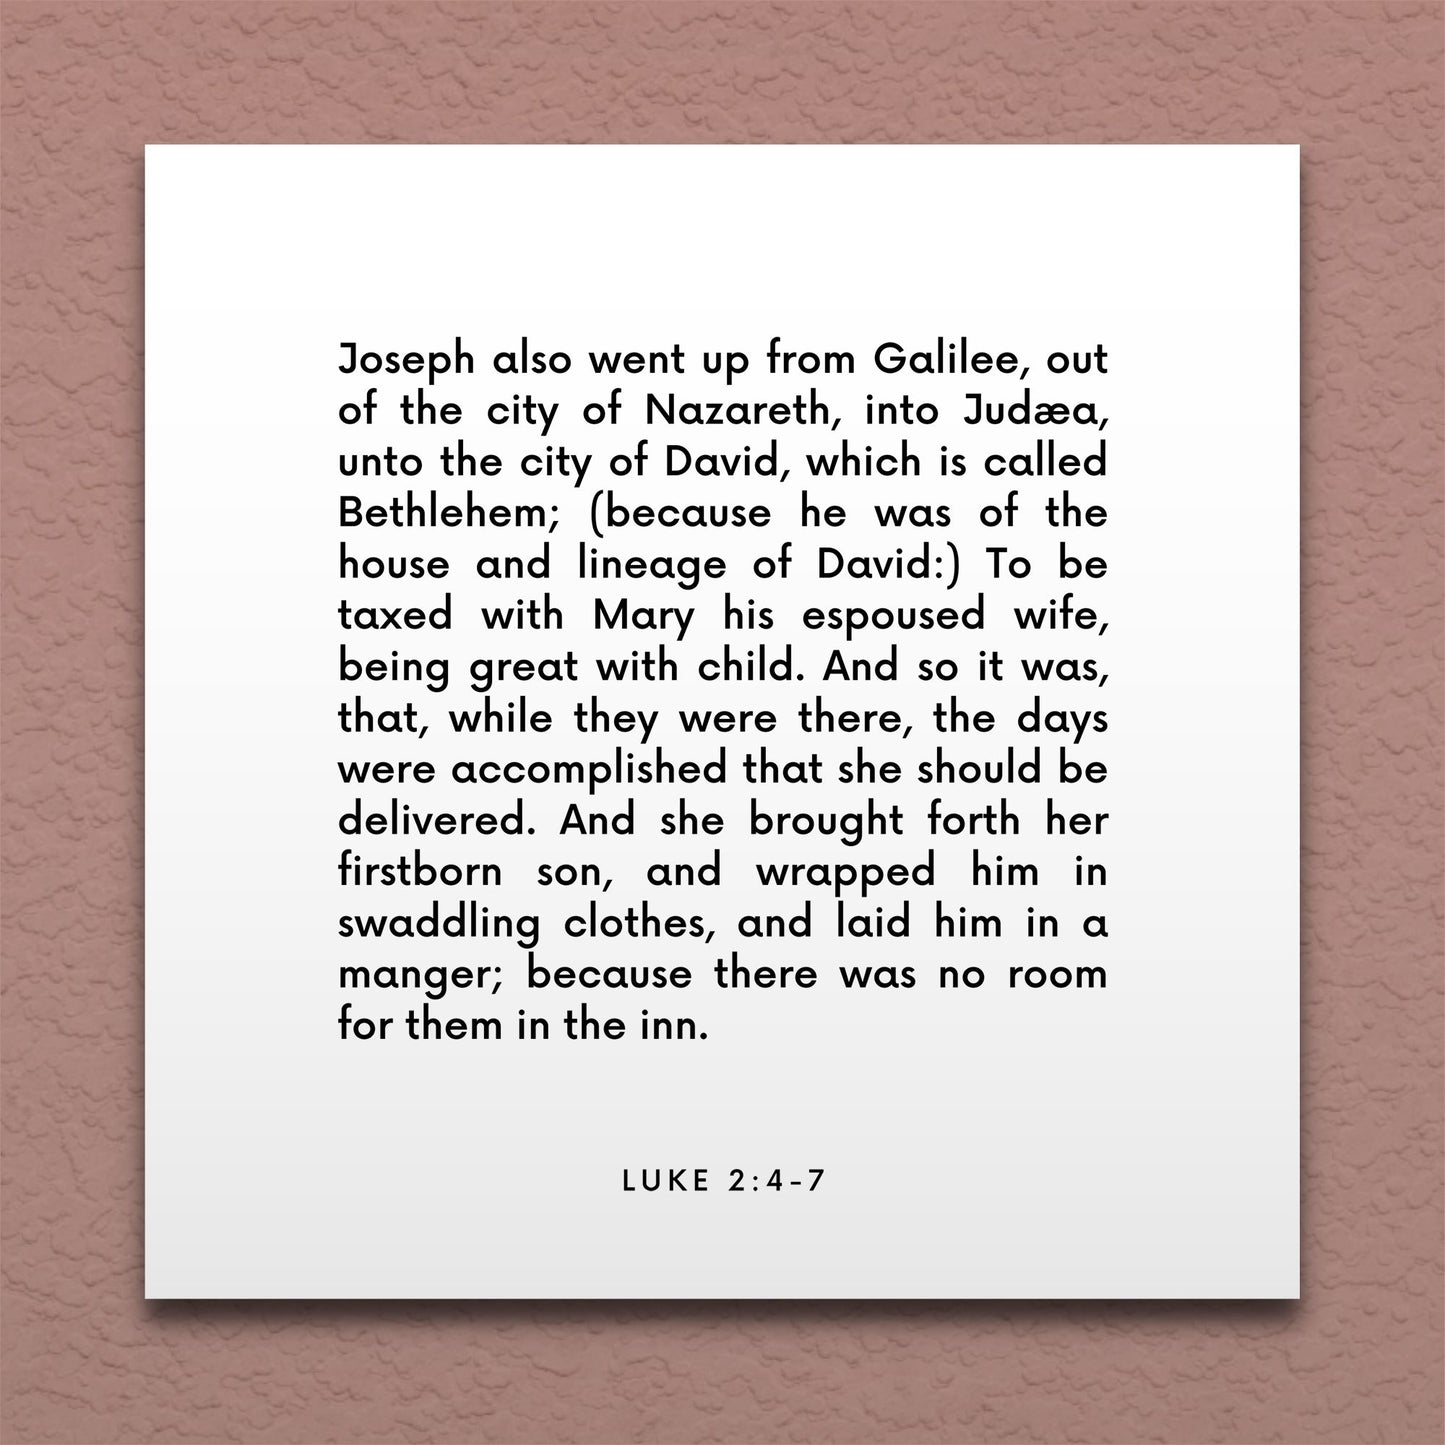 Wall-mounted scripture tile for Luke 2:4-7 - "Joseph also went up from Galilee, unto the city of David"